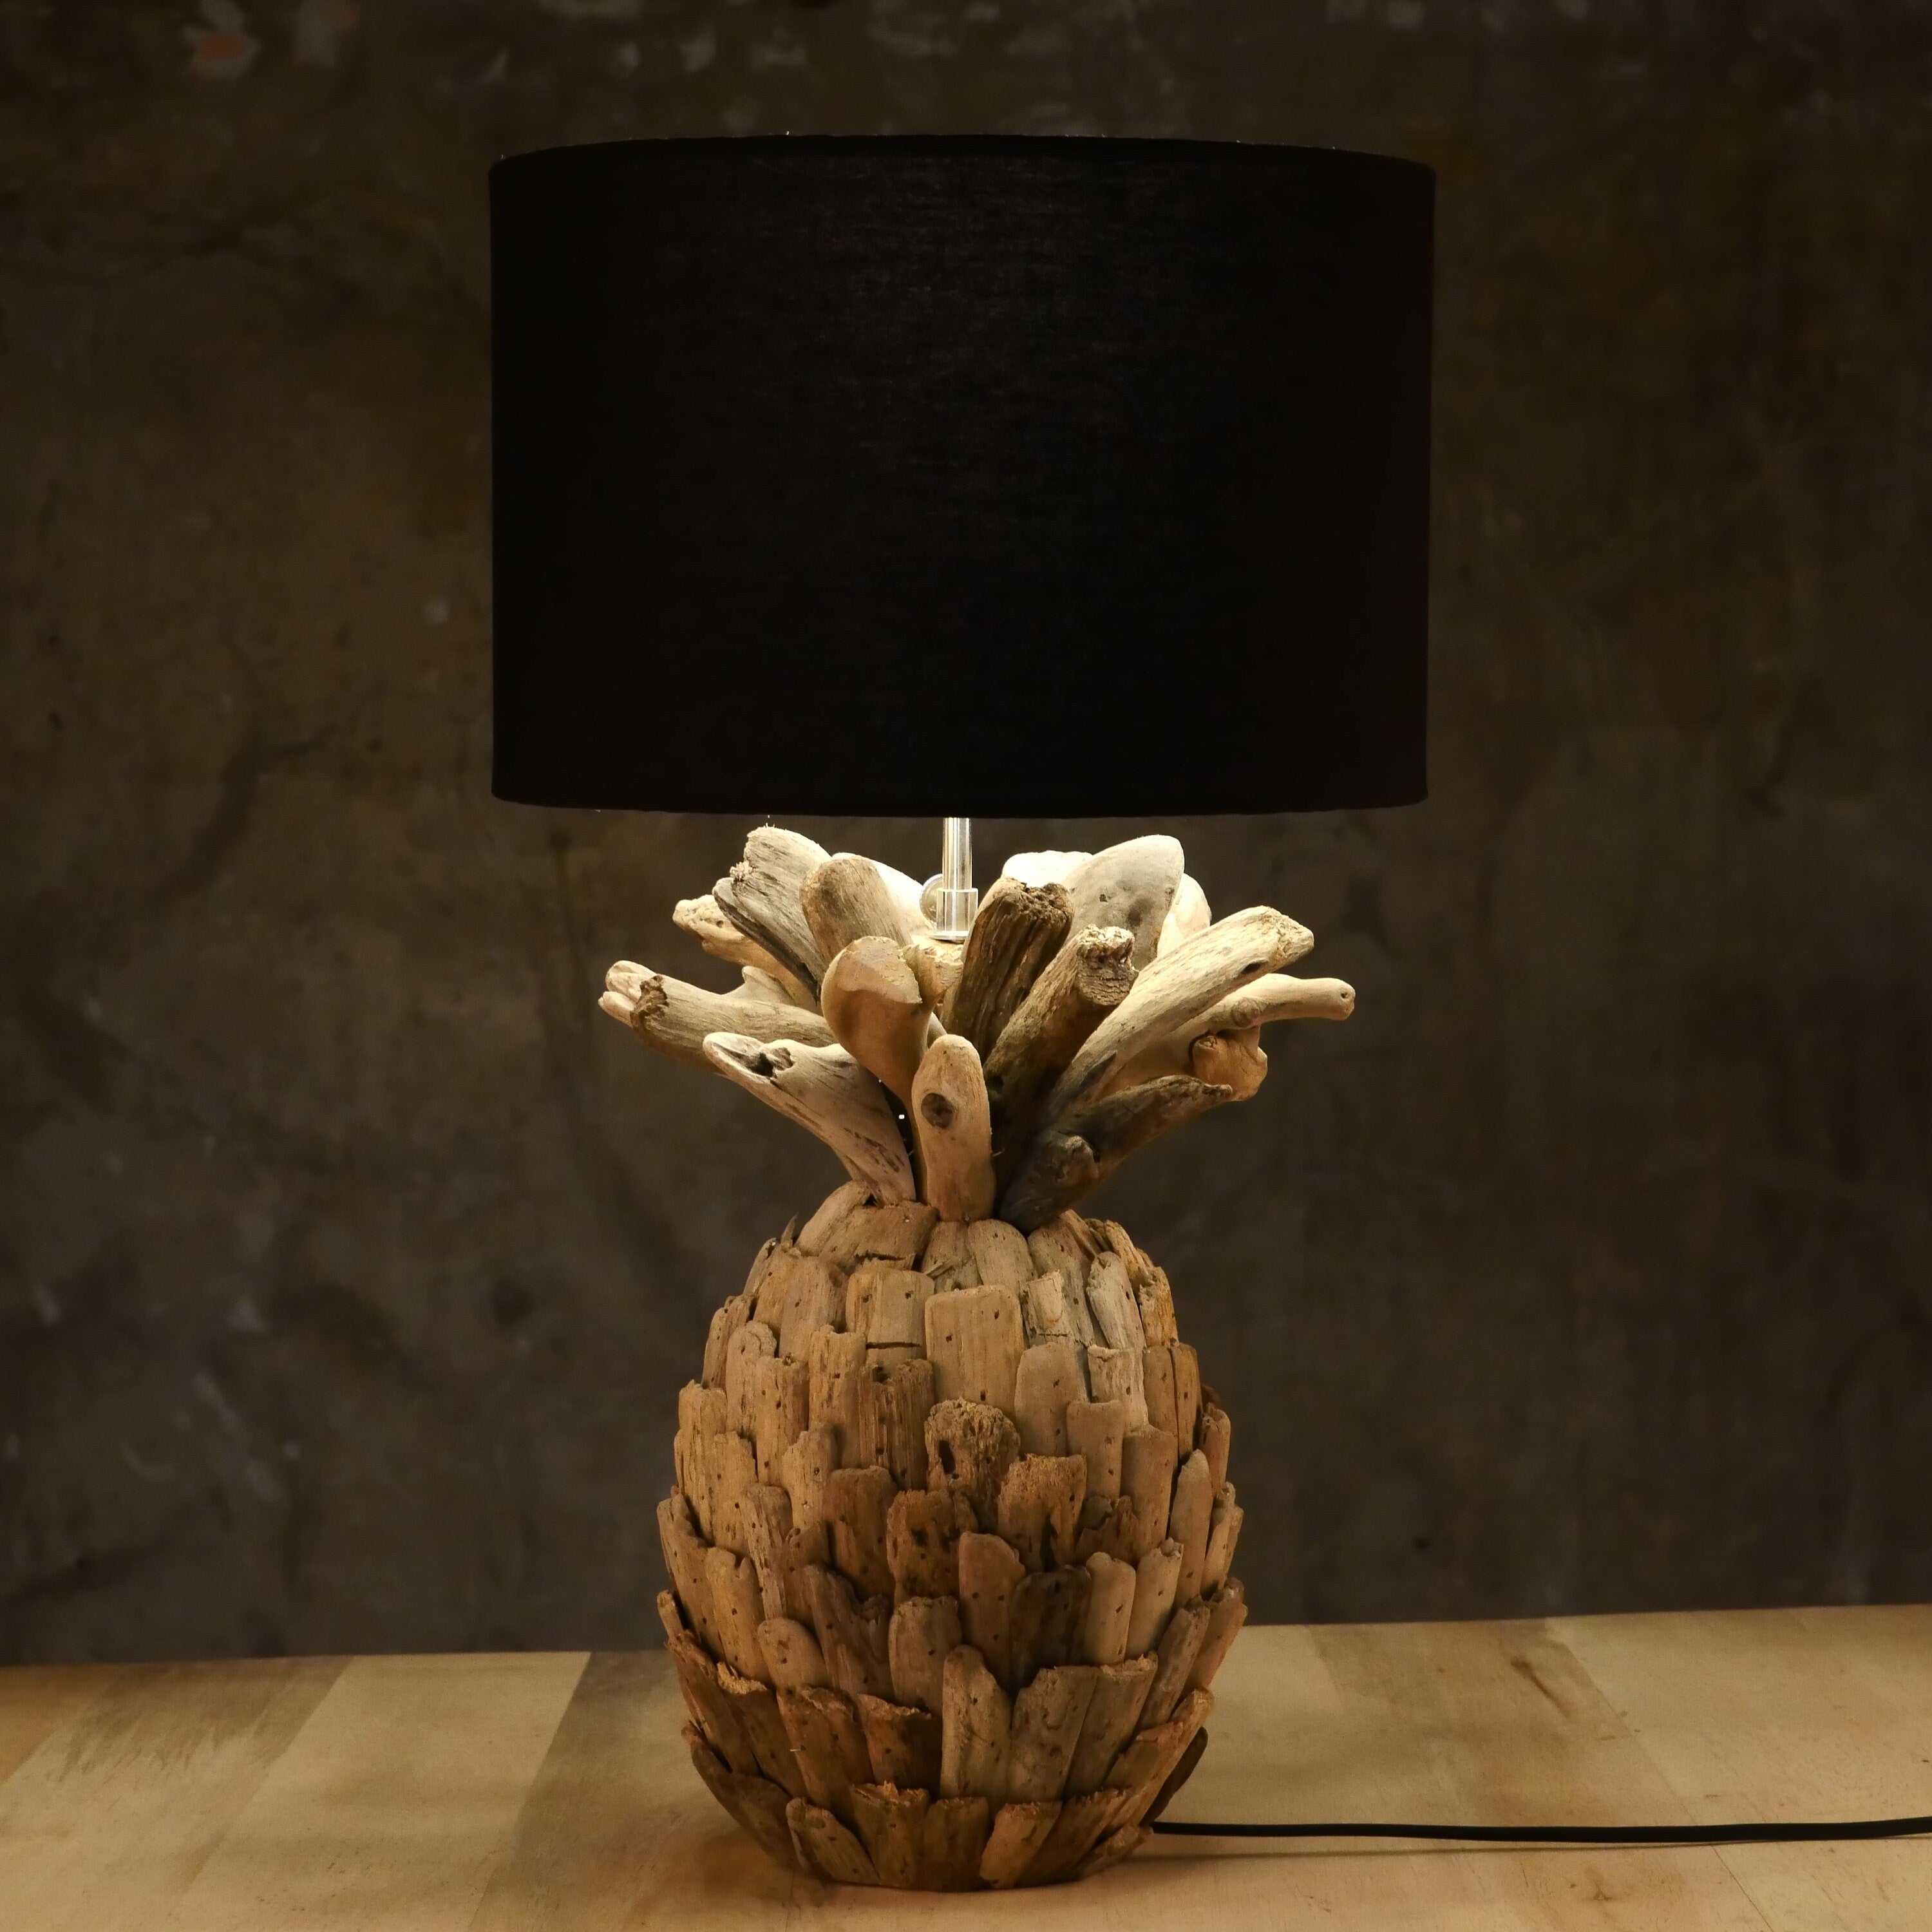 Driftwood Pineapple Table Lamp - Pineapple Lamp Shade - Pineapple Accent Table Lamp - Home Decor Lighting - Driftwood Lamp